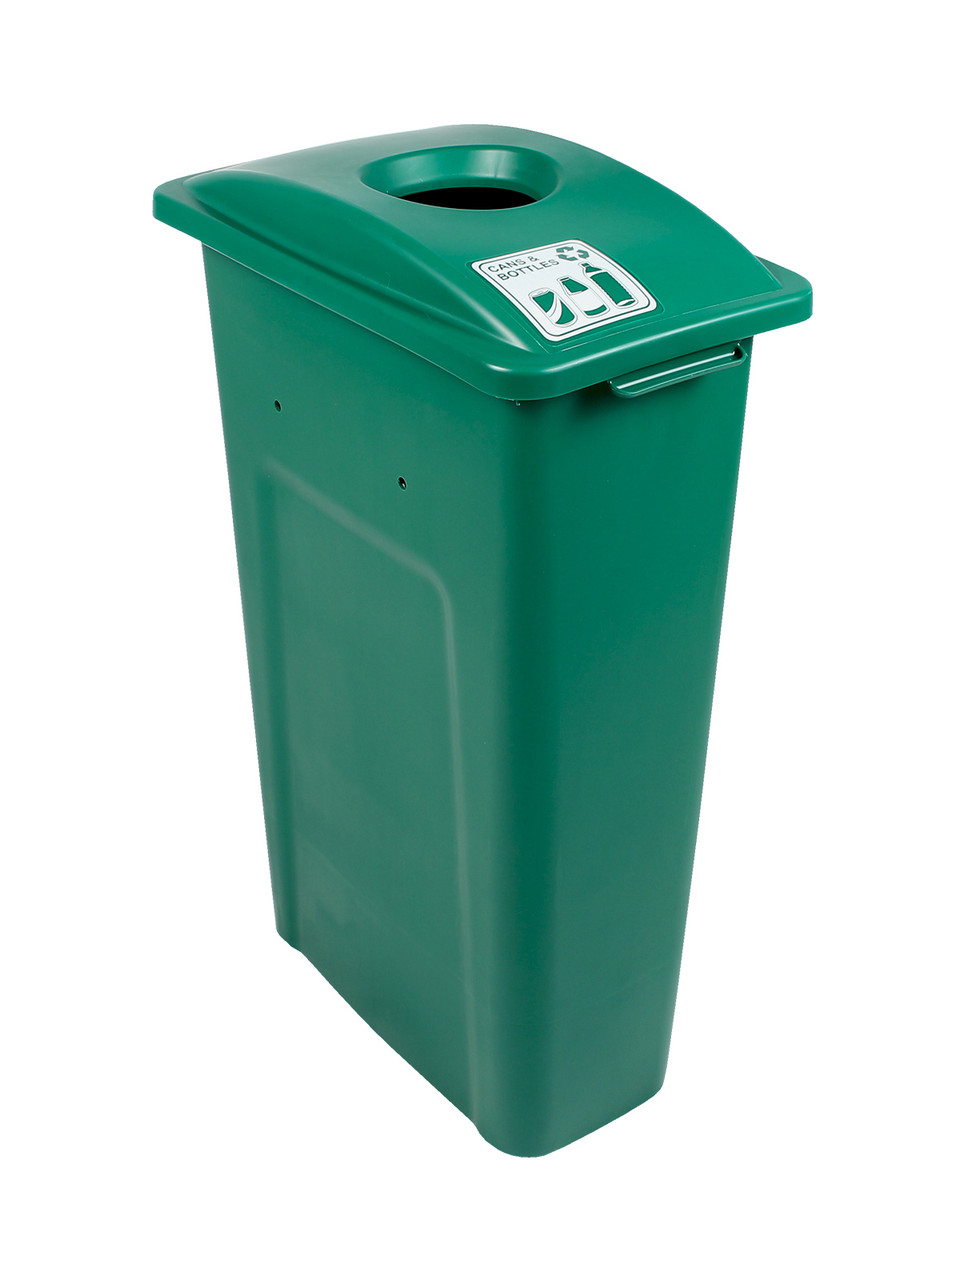 23 Gallon Green Skinny Simple Sort Recycle Bin (Cans & Bottles)